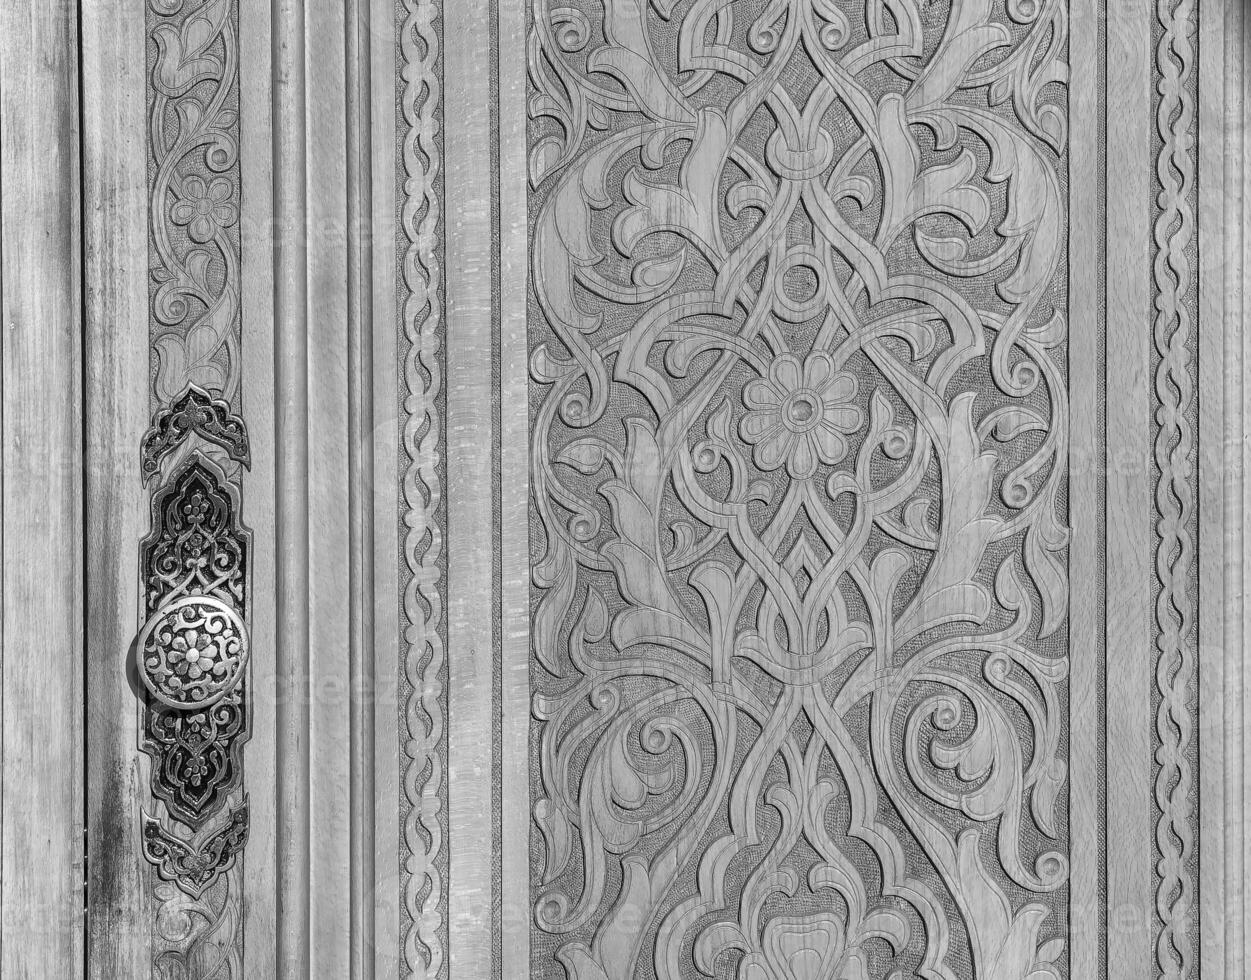 Black and white Carved wooden doors with patterns and mosaics. photo